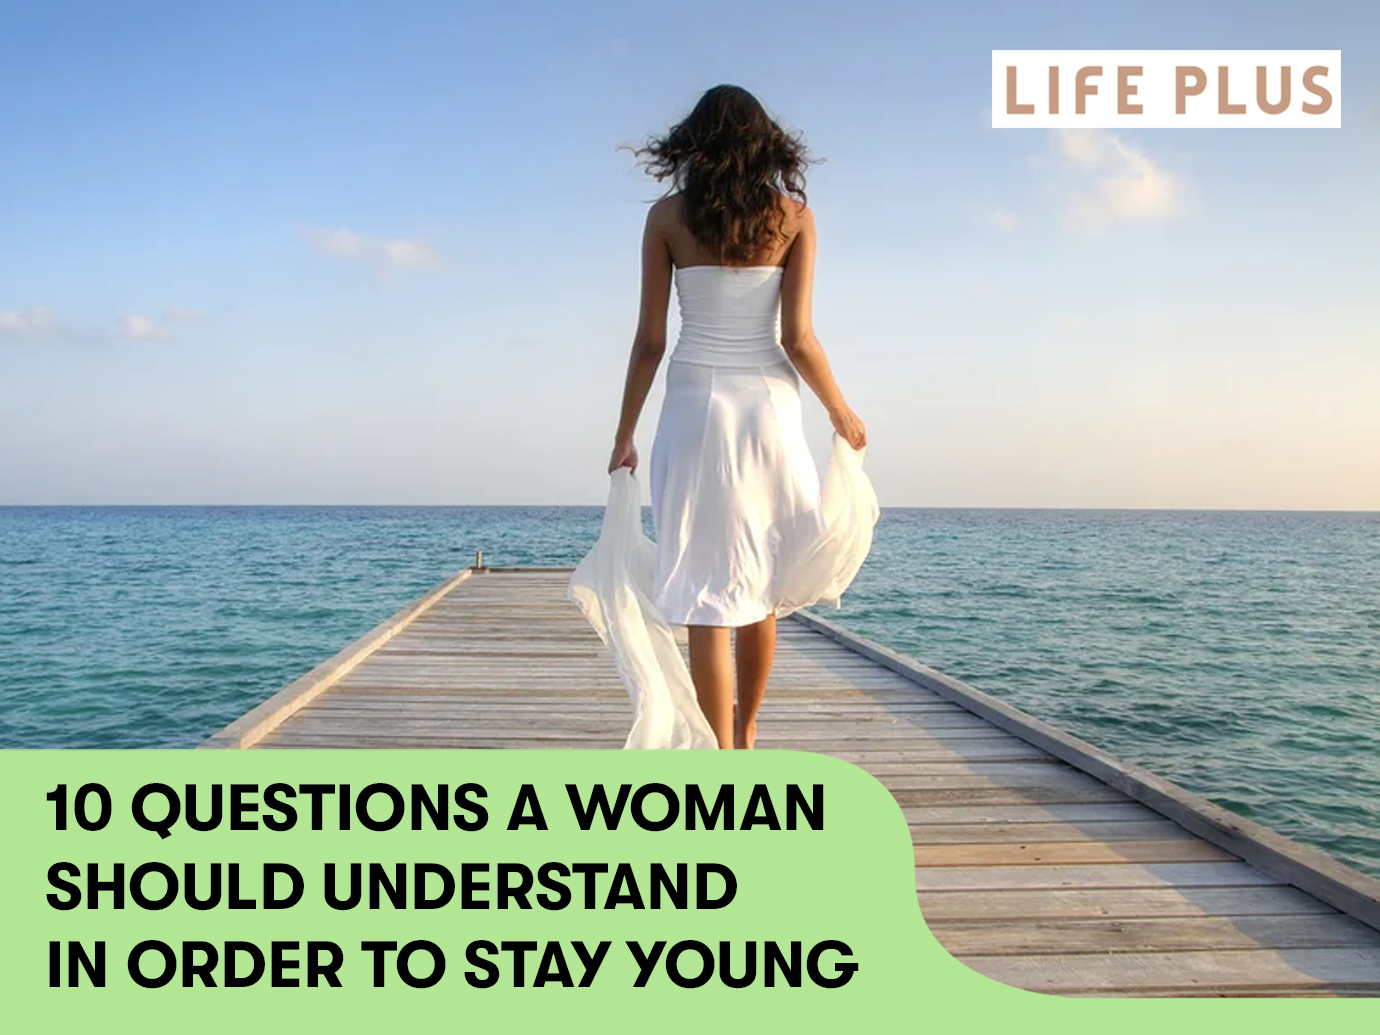 10 QUESTIONS A WOMAN SHOULD UNDERSTAND IN ORDER TO STAY YOUNG